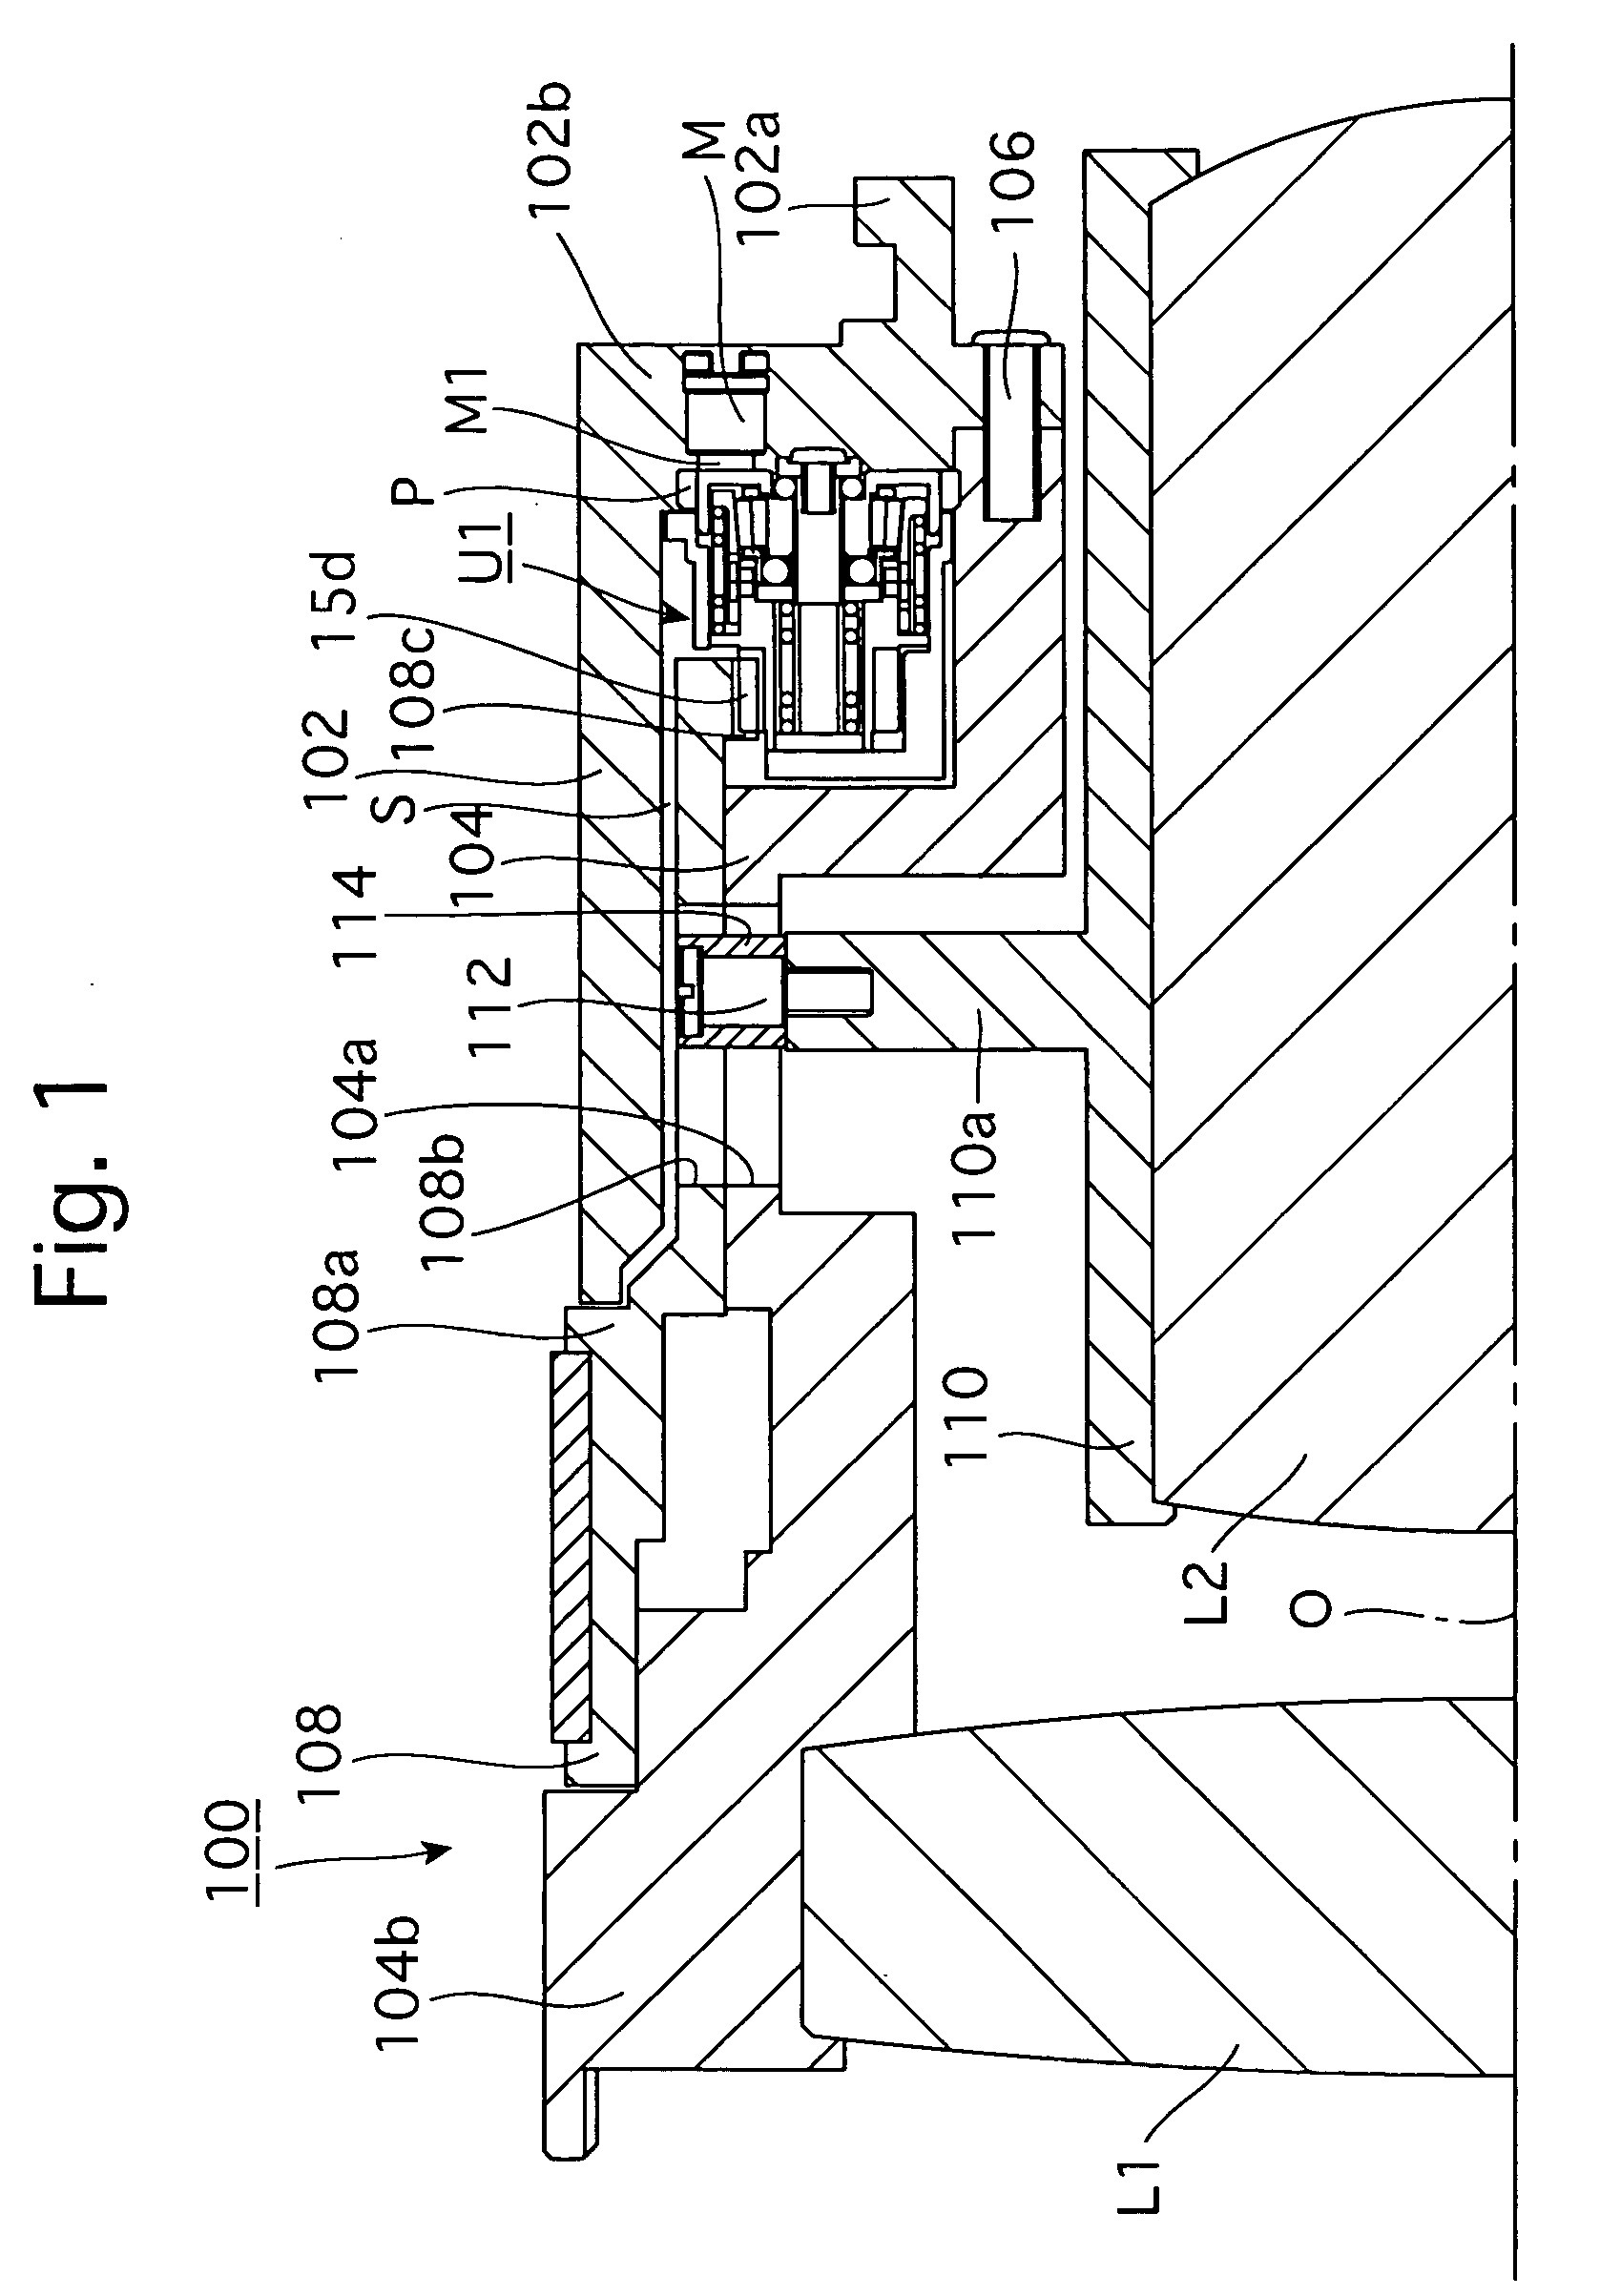 One-way rotational transfer mechanism, and a lens barrel incorporating the same